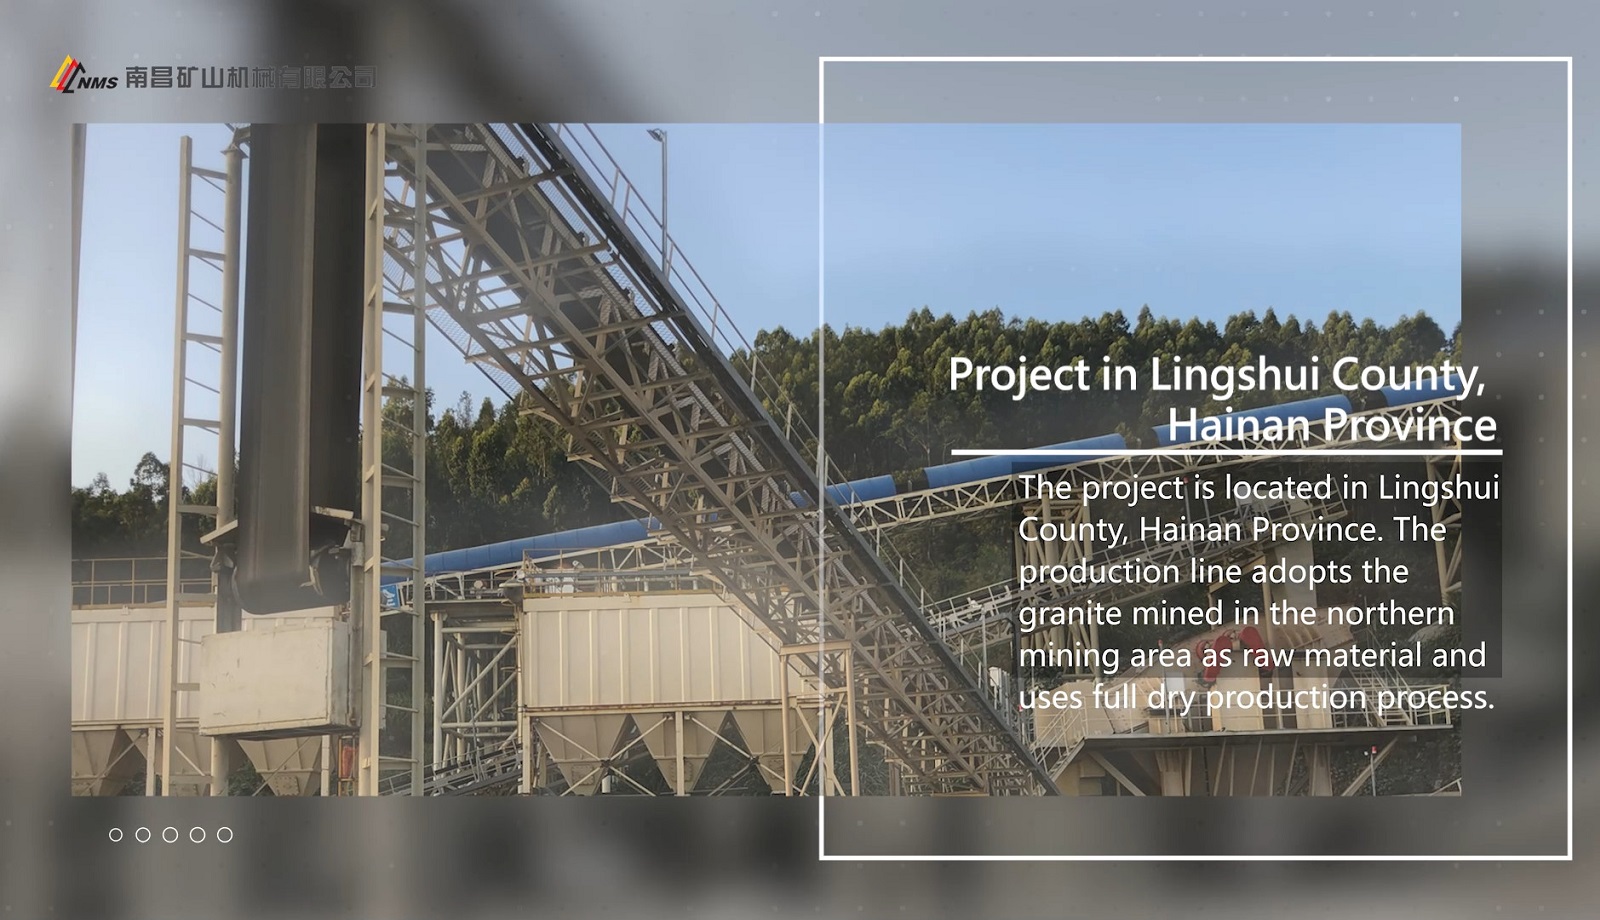 The Commissioning of NMS for Project in Linshui County, Hainan Province Has Been Done Successfully